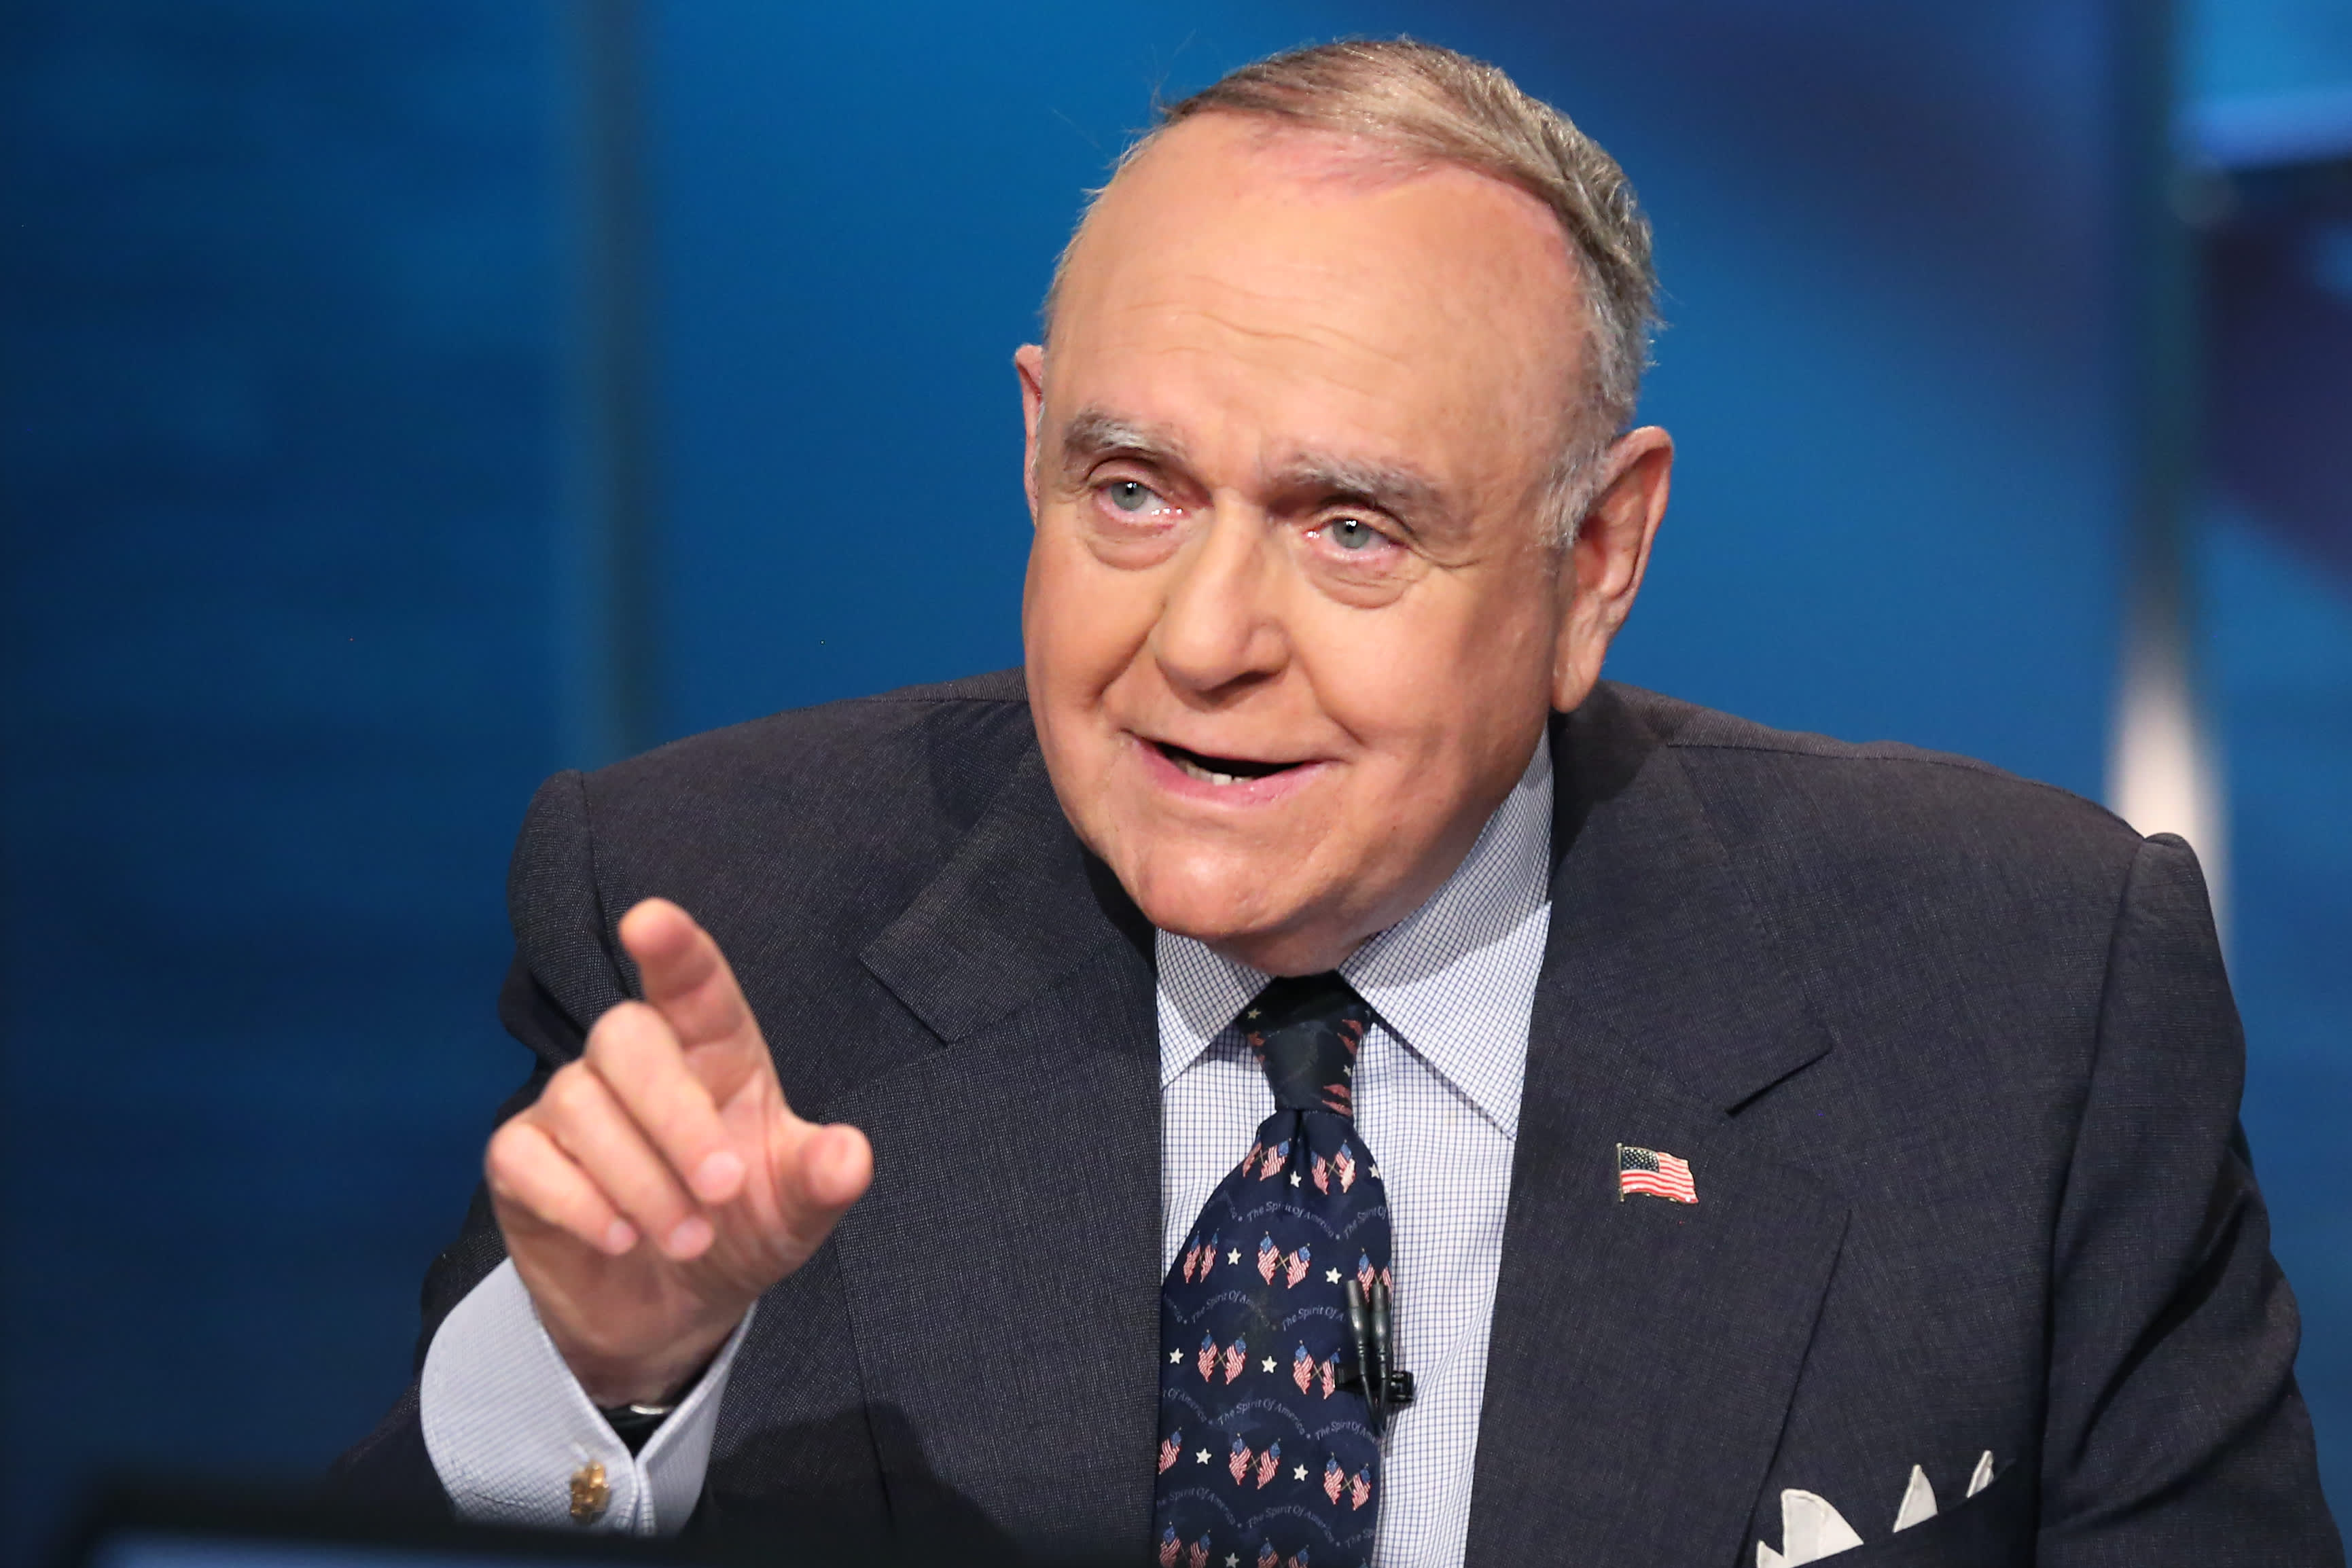 Leon Cooperman says new bull market isn't coming anytime soon, but he's finding cheap stocks to buy